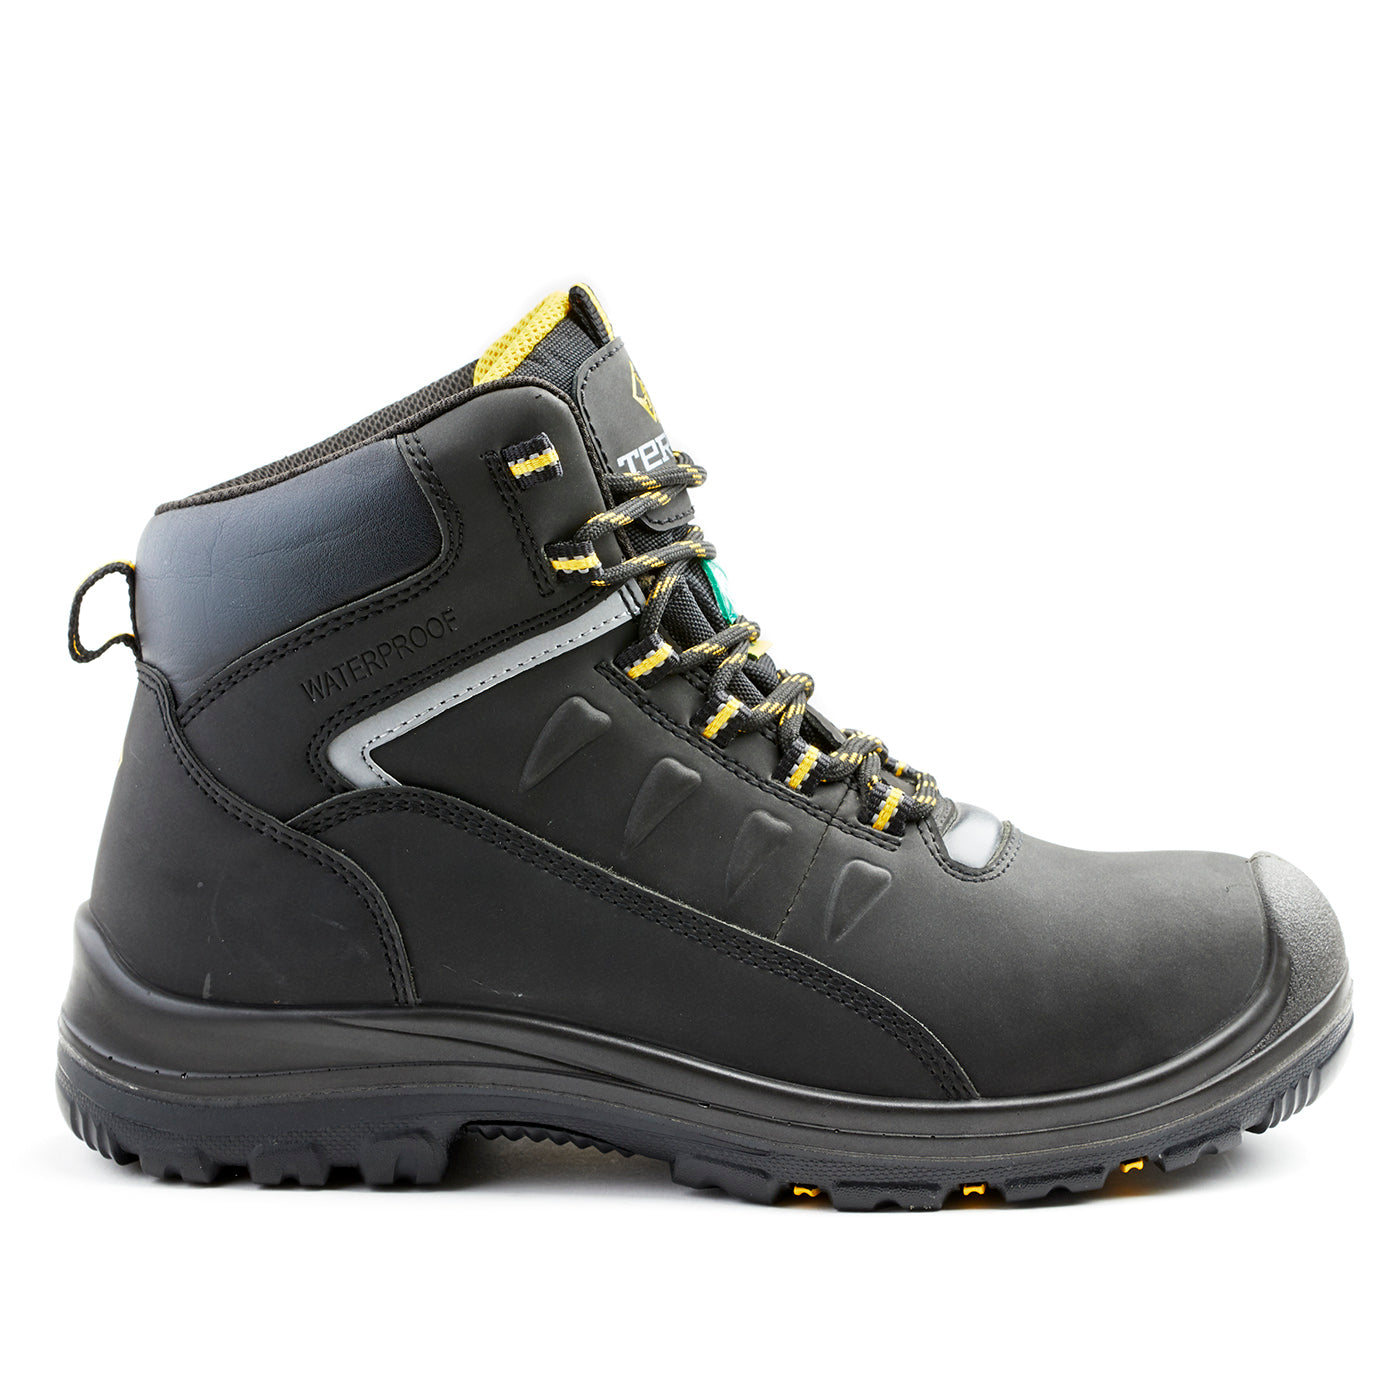 Terra Findlay Composite Toe 6" Men's Safety Boots | Black | Sizes 7-14 Work Boots - Cleanflow